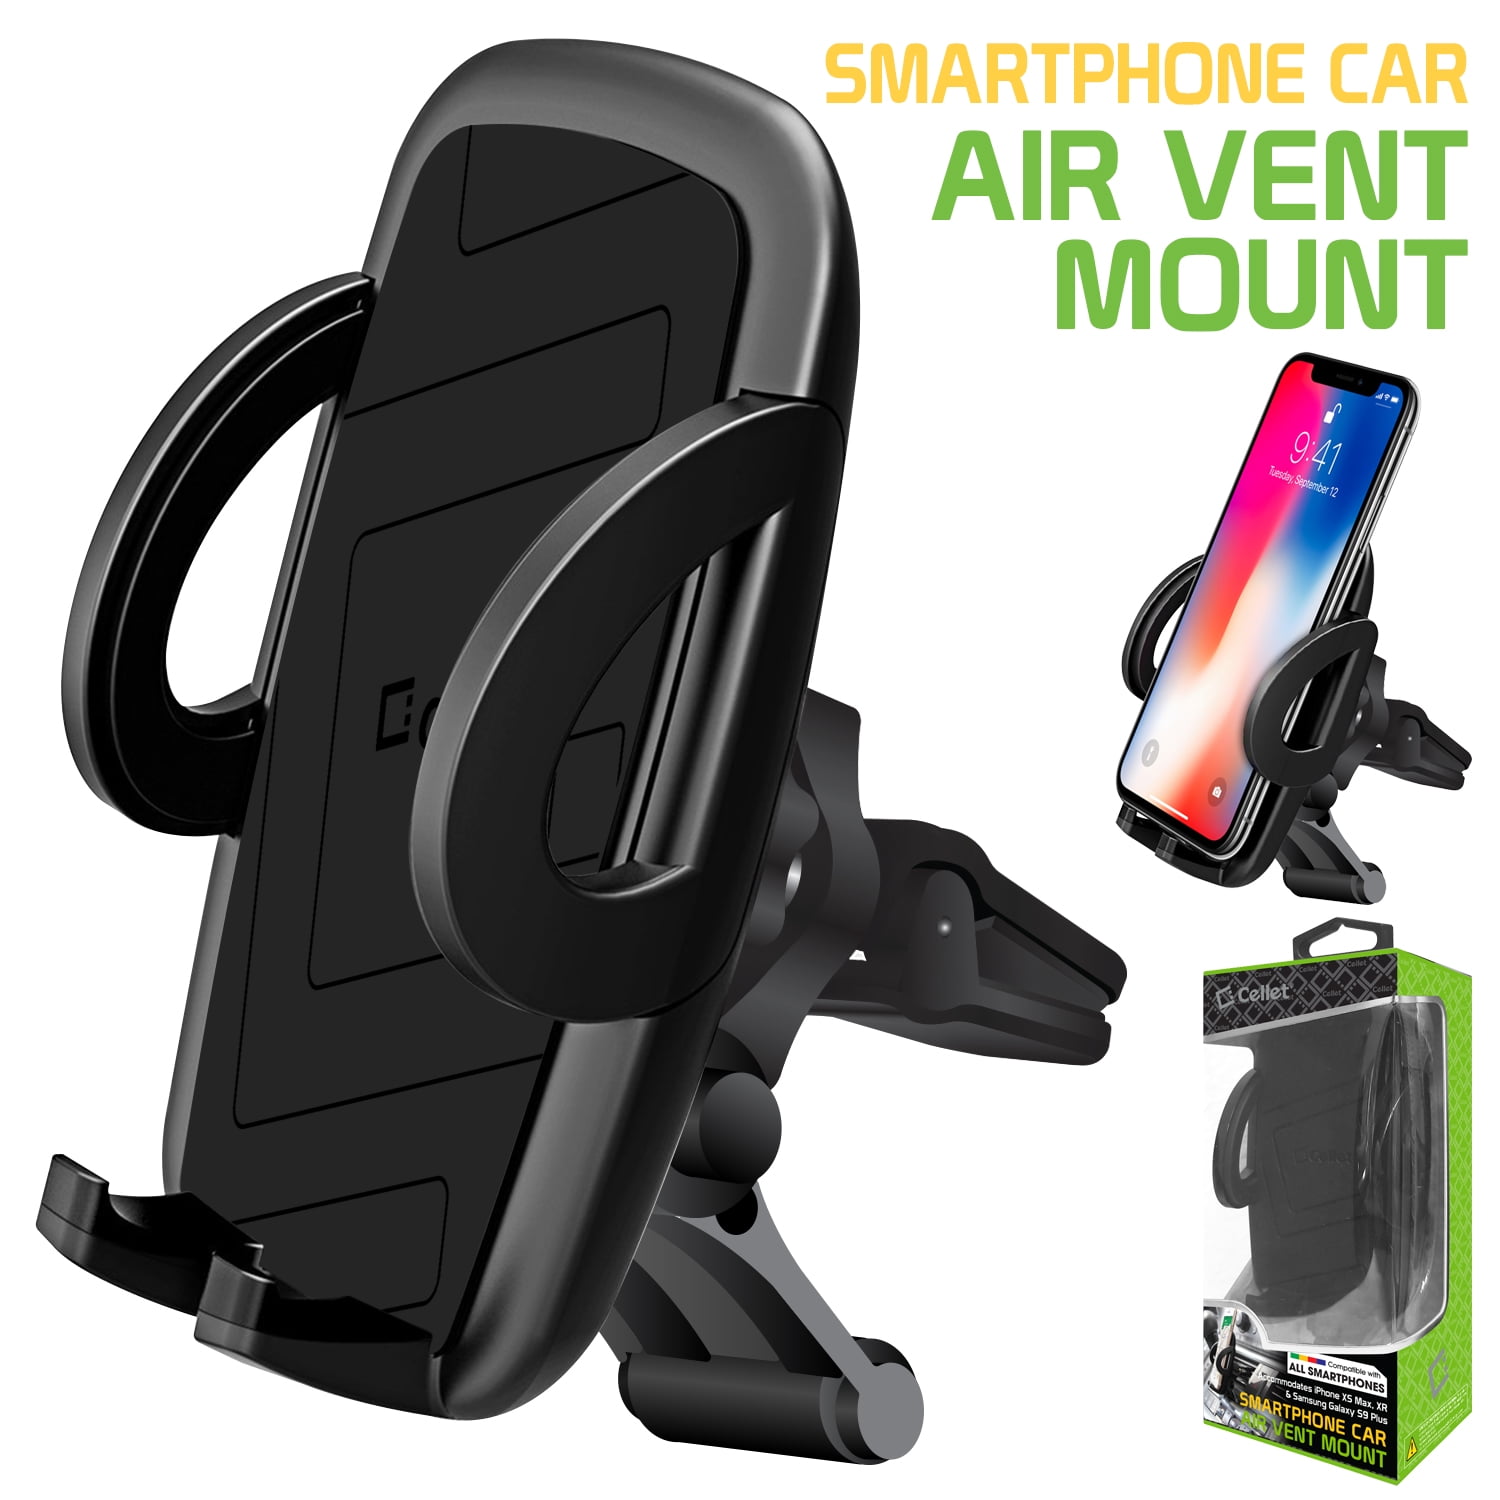 Note 8 and Mini Tablet Portable Gravity Car Air Vent Cell Phone Holder Compatible with X/Xs/Xs Max/8/7/6 Plus Veidoo Car Phone Mounts Compatible with S10/S9/S8/S7/S7 Edge